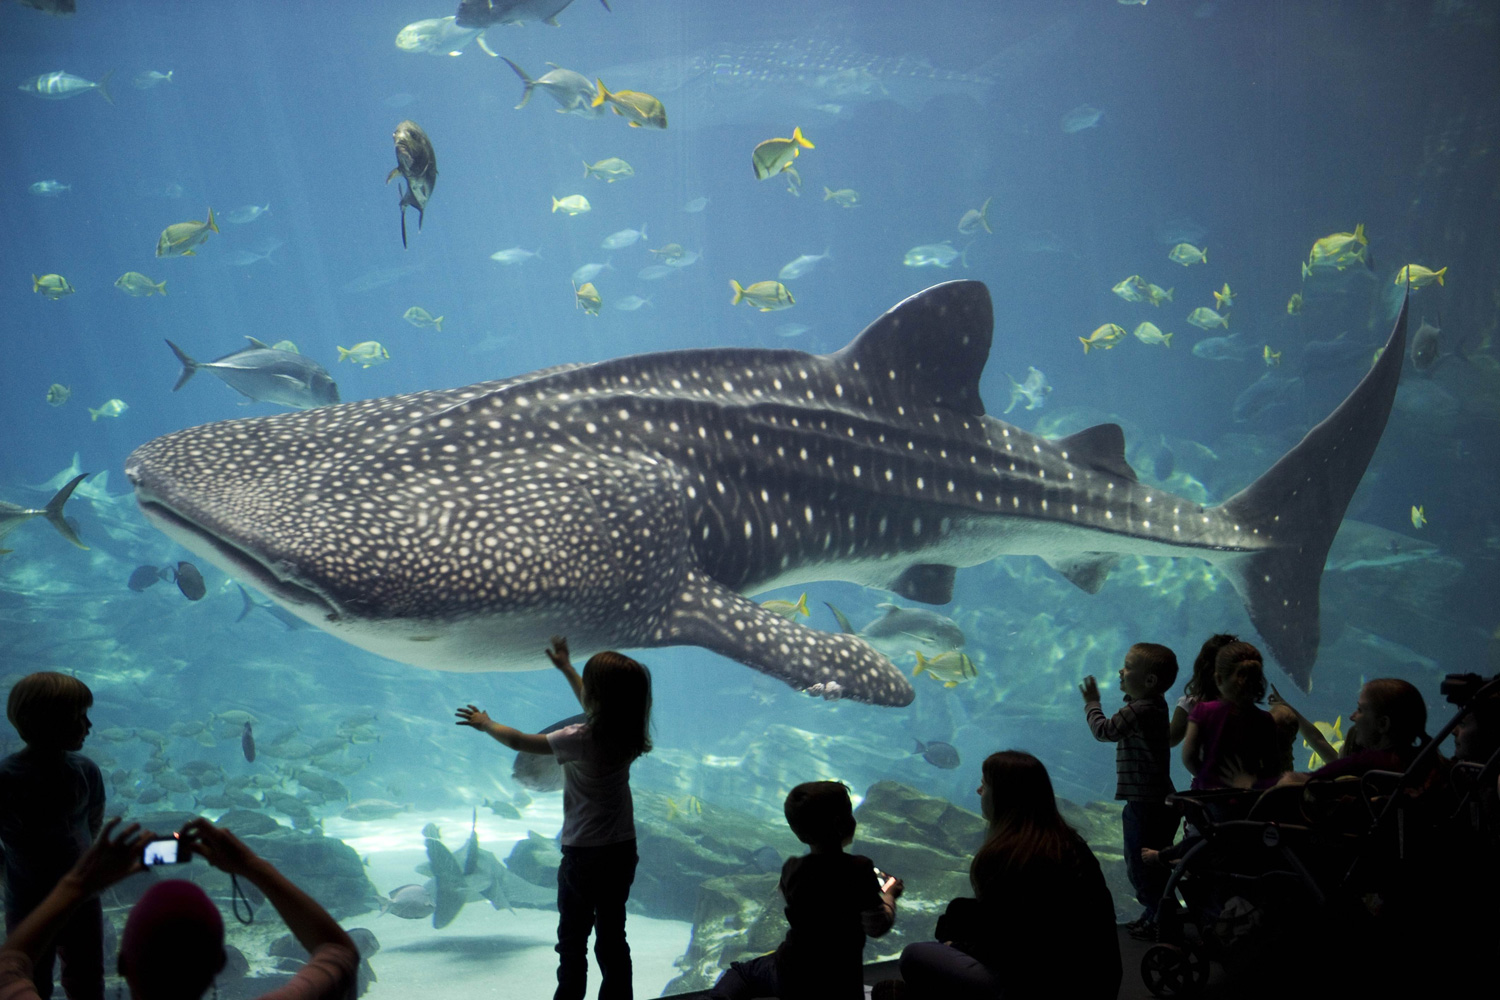 March 6, 2012. Children and parents are dwarfed by a whale shark as it passes by inside a tank at the Georgia Aquarium in Atlanta.